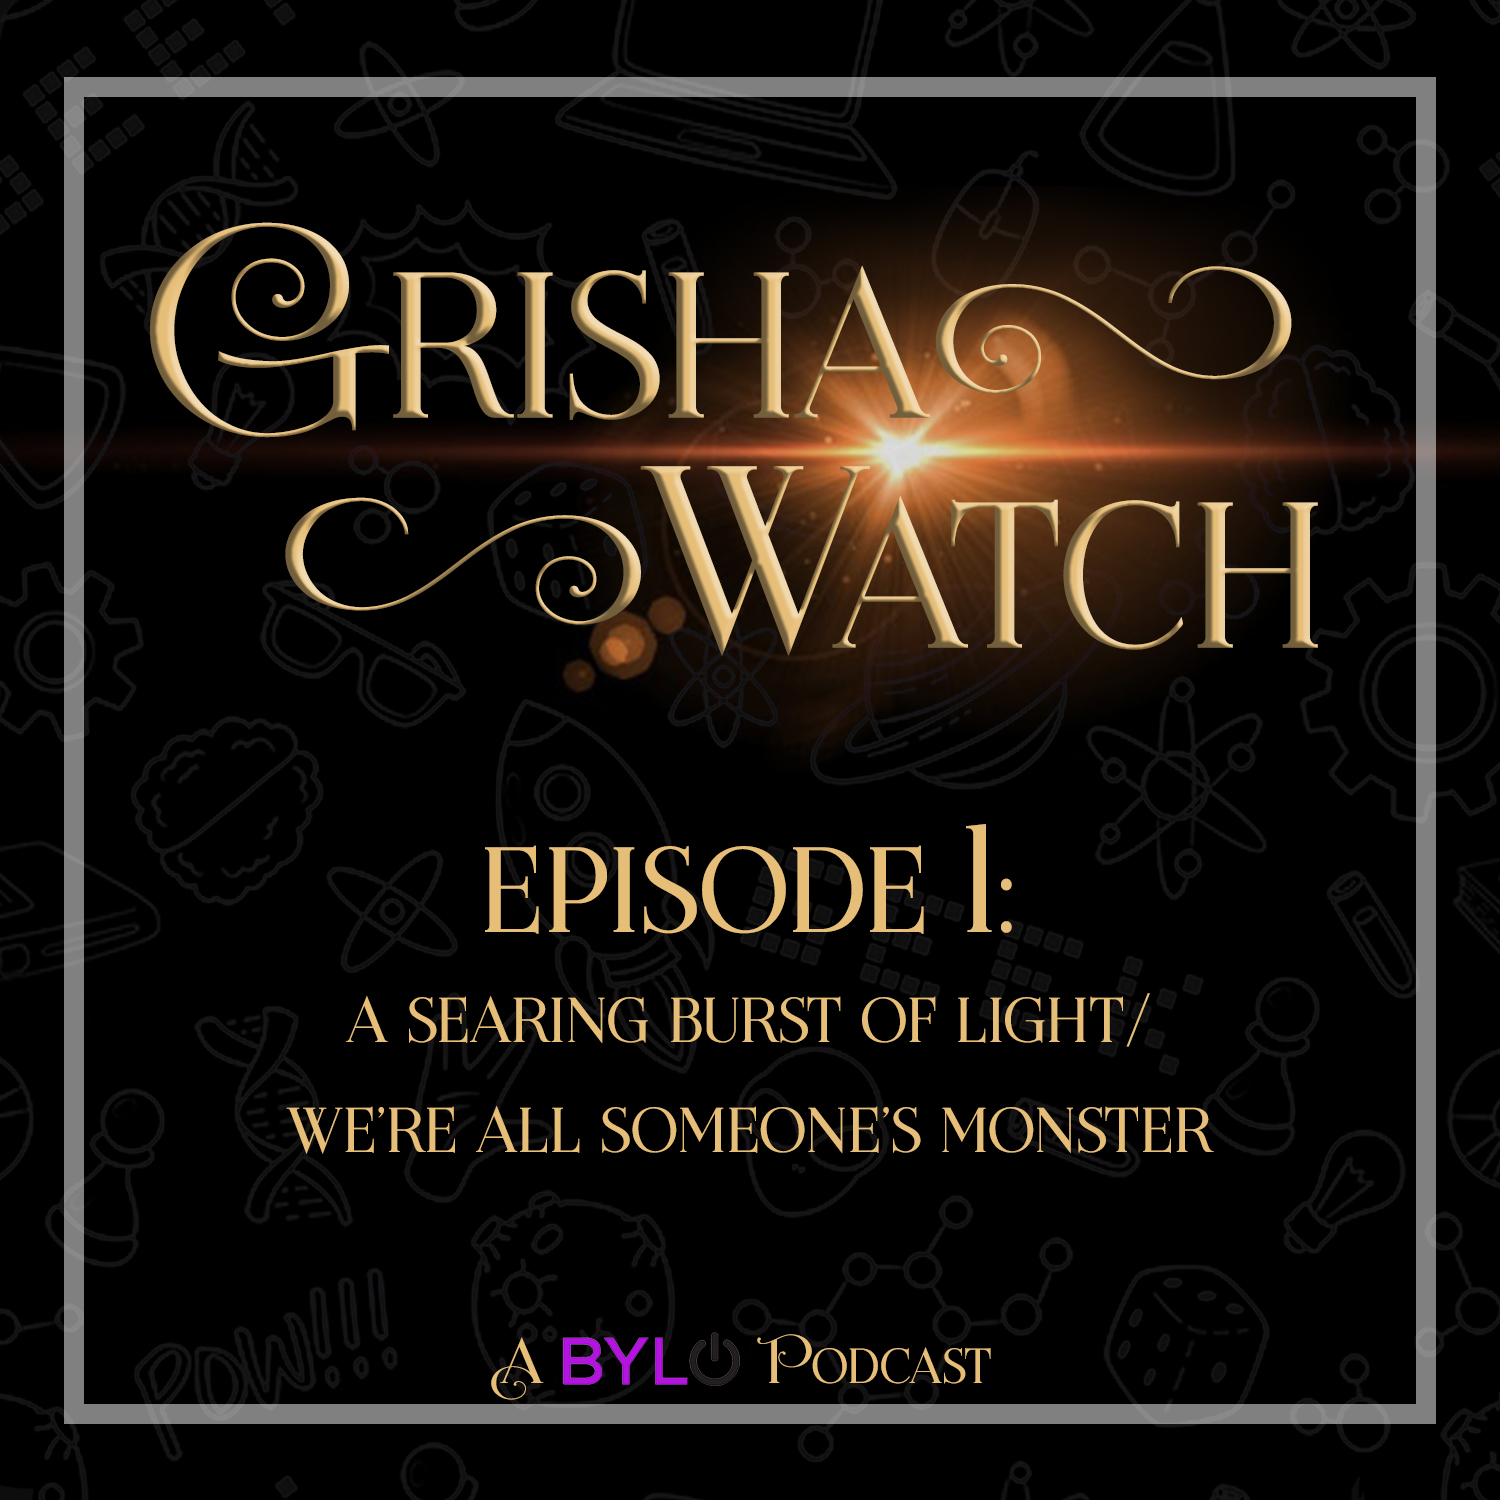 Grisha Watch ep 01 "A Searing Burst of Light" and "We're All Someone's Monster"